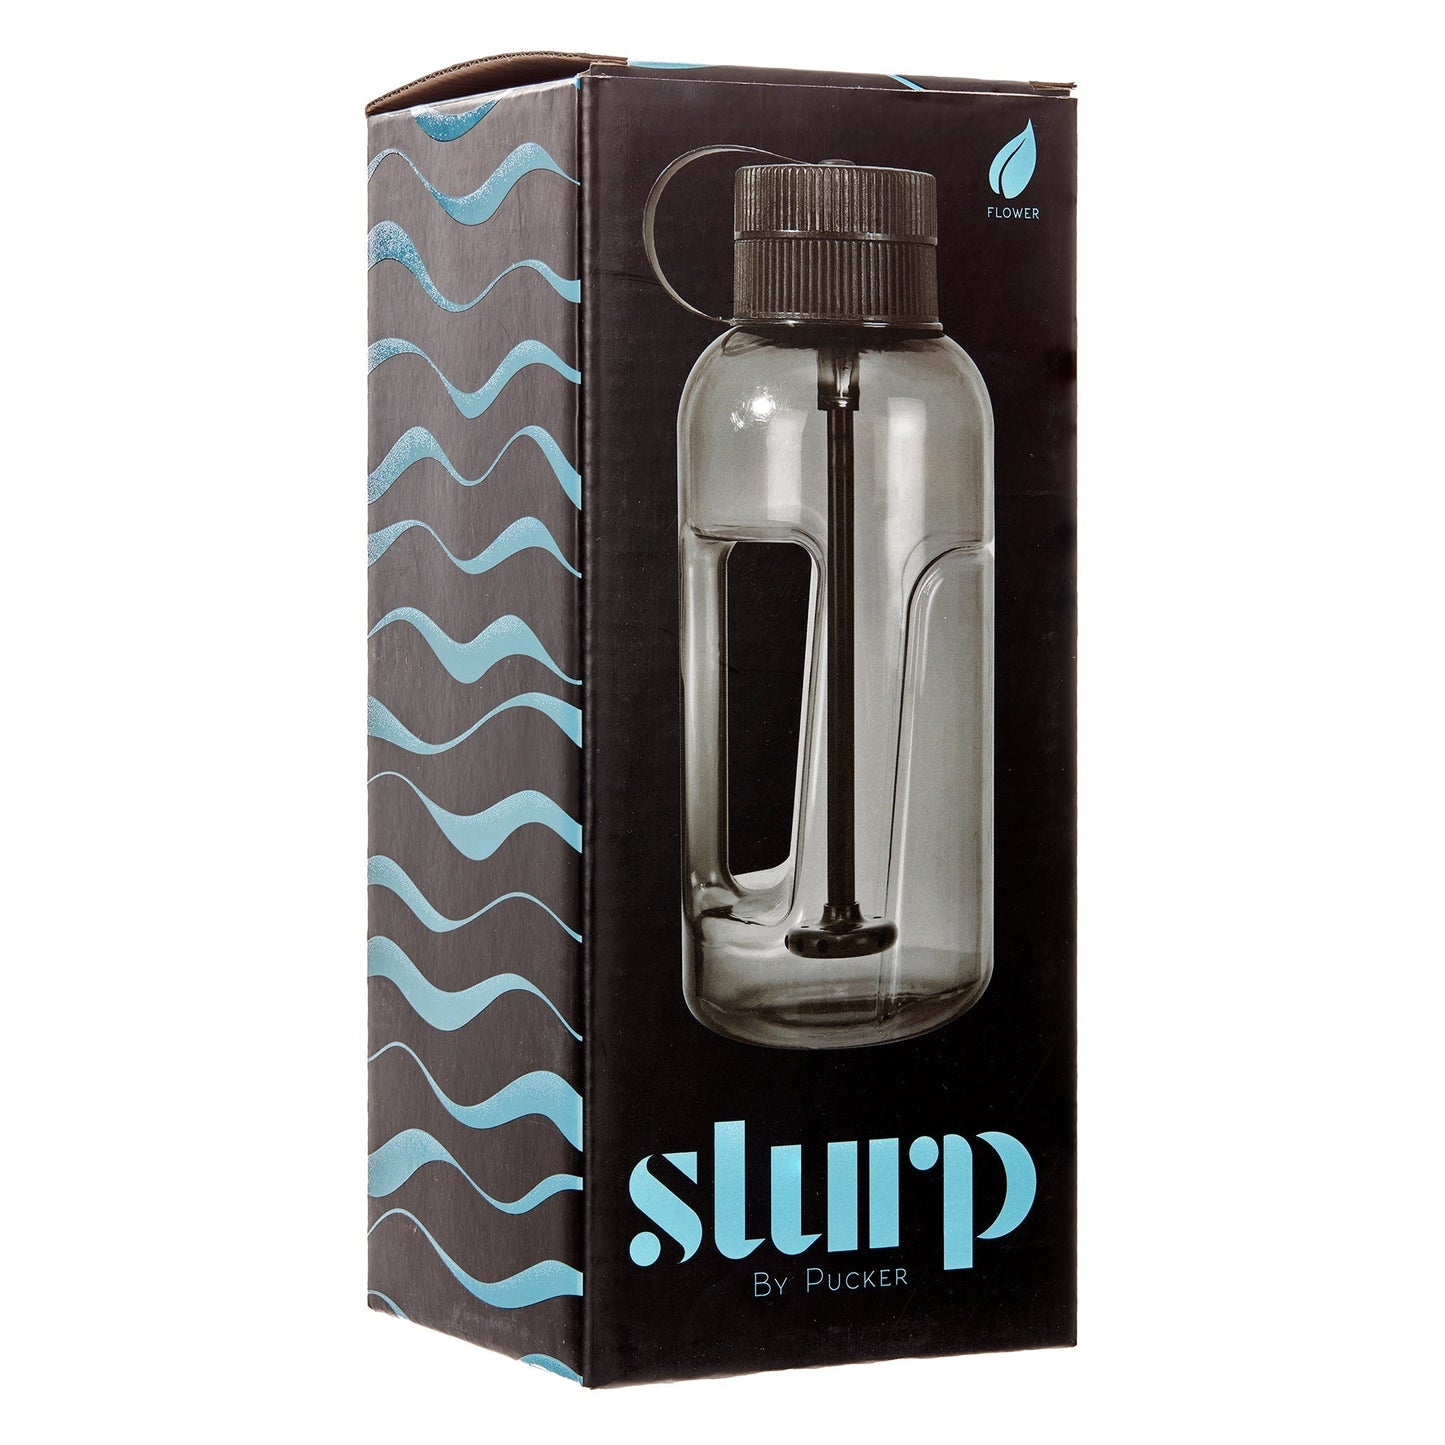 PUCKER "Slurp" Water Bottle Smoking Pipe Bong - (1 Count)-Hand Glass, Rigs, & Bubblers